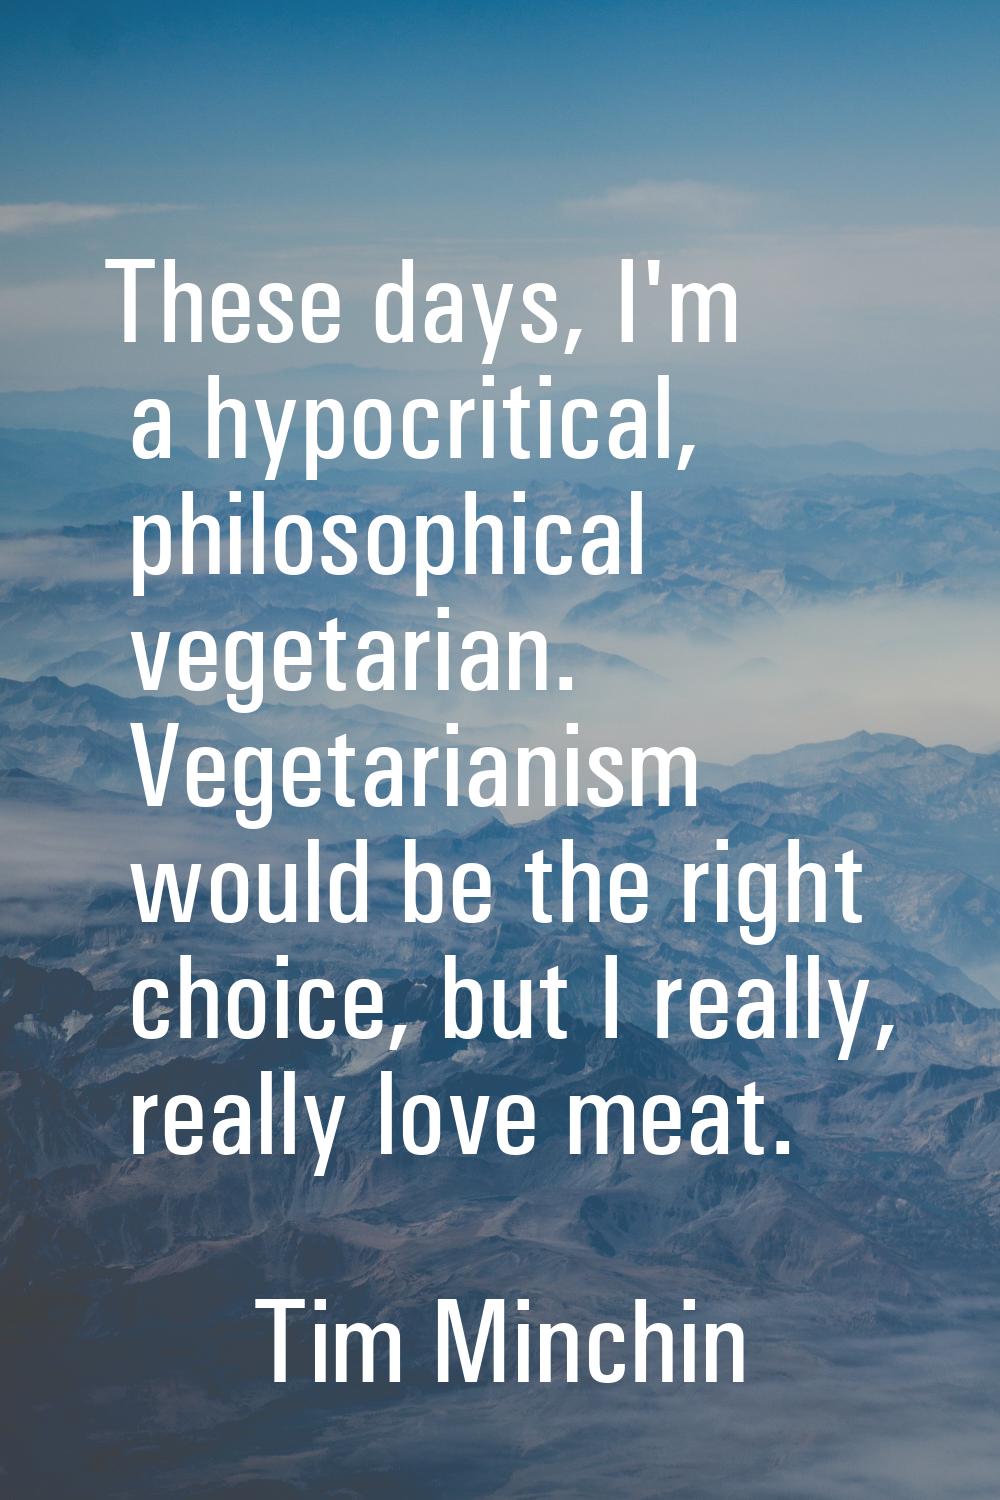 These days, I'm a hypocritical, philosophical vegetarian. Vegetarianism would be the right choice, 